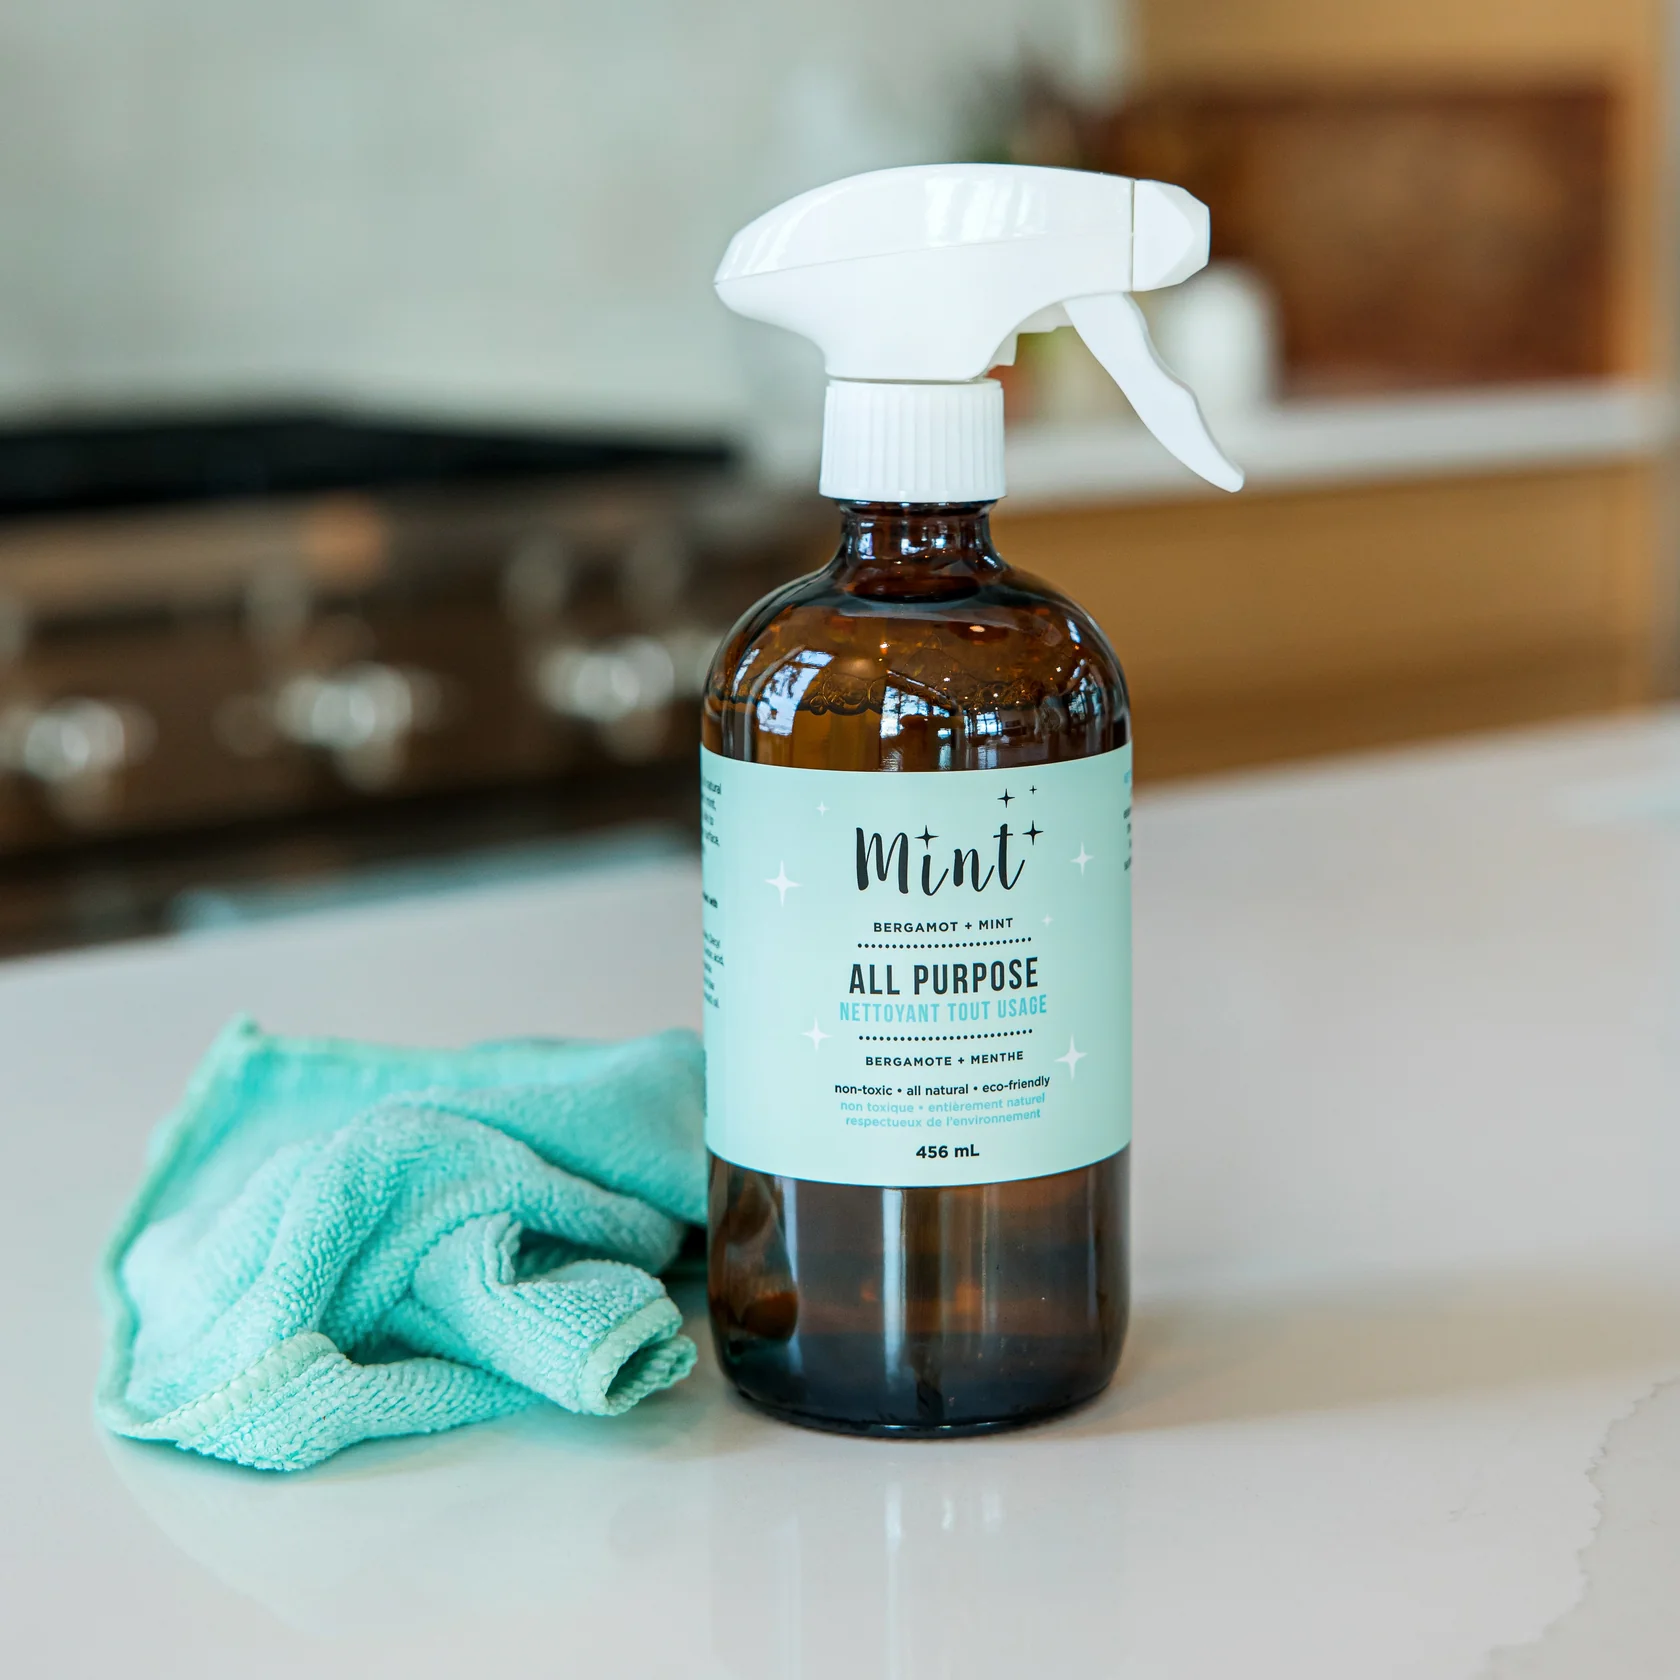 A bottle of Mint all purpose cleaning spray.